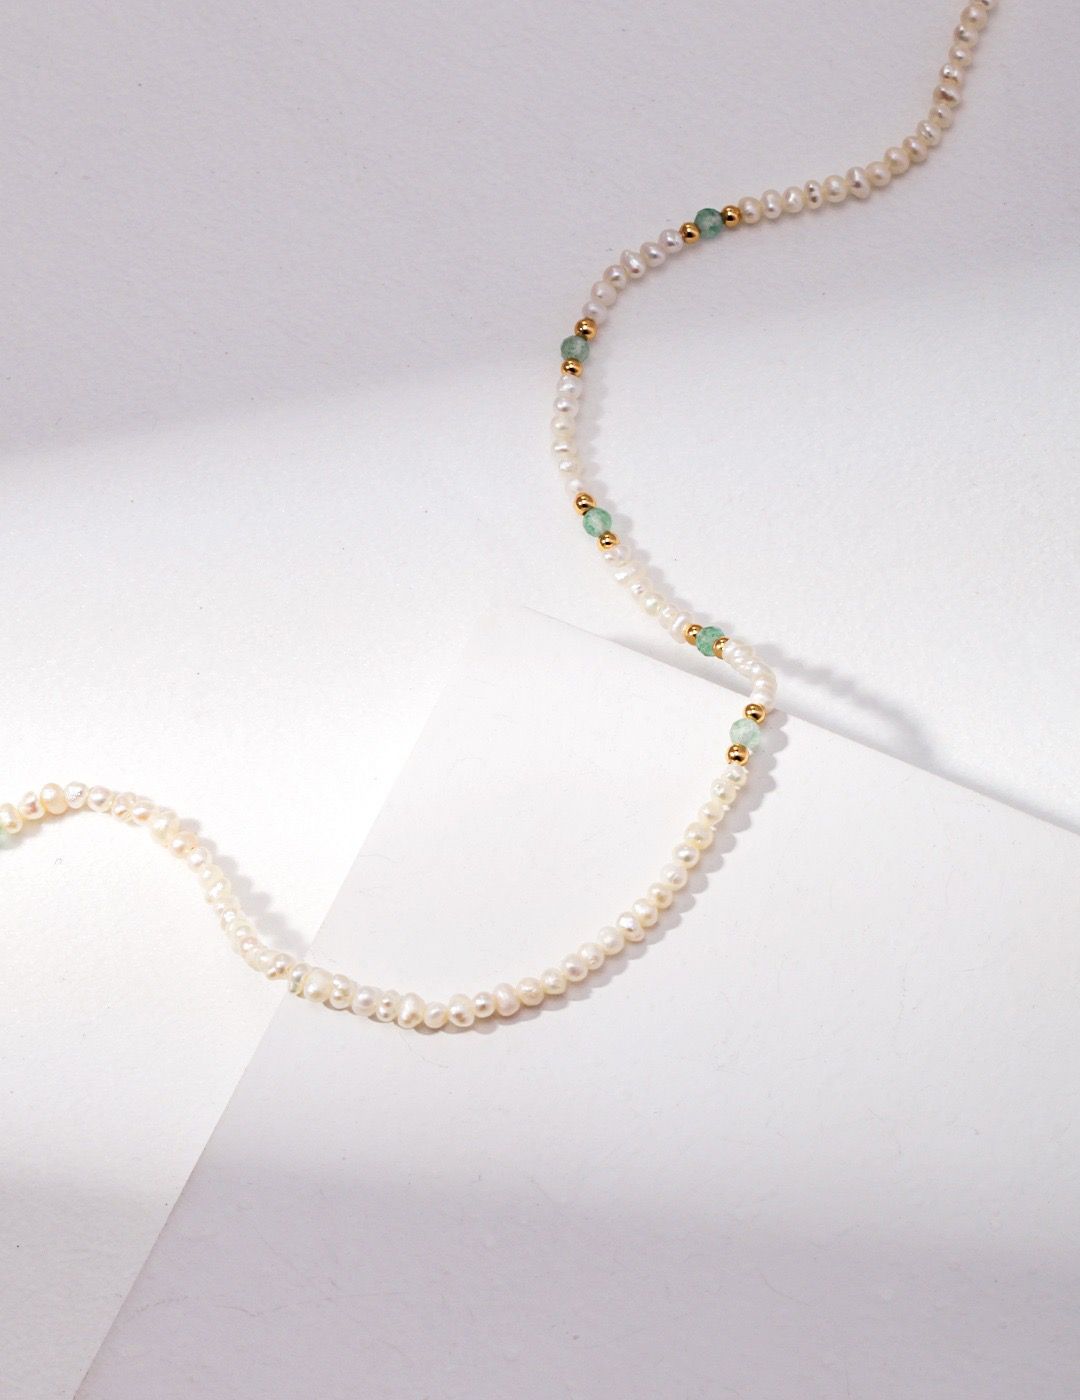 Beachy Beaded Pearl and Quartz Necklace on a white background